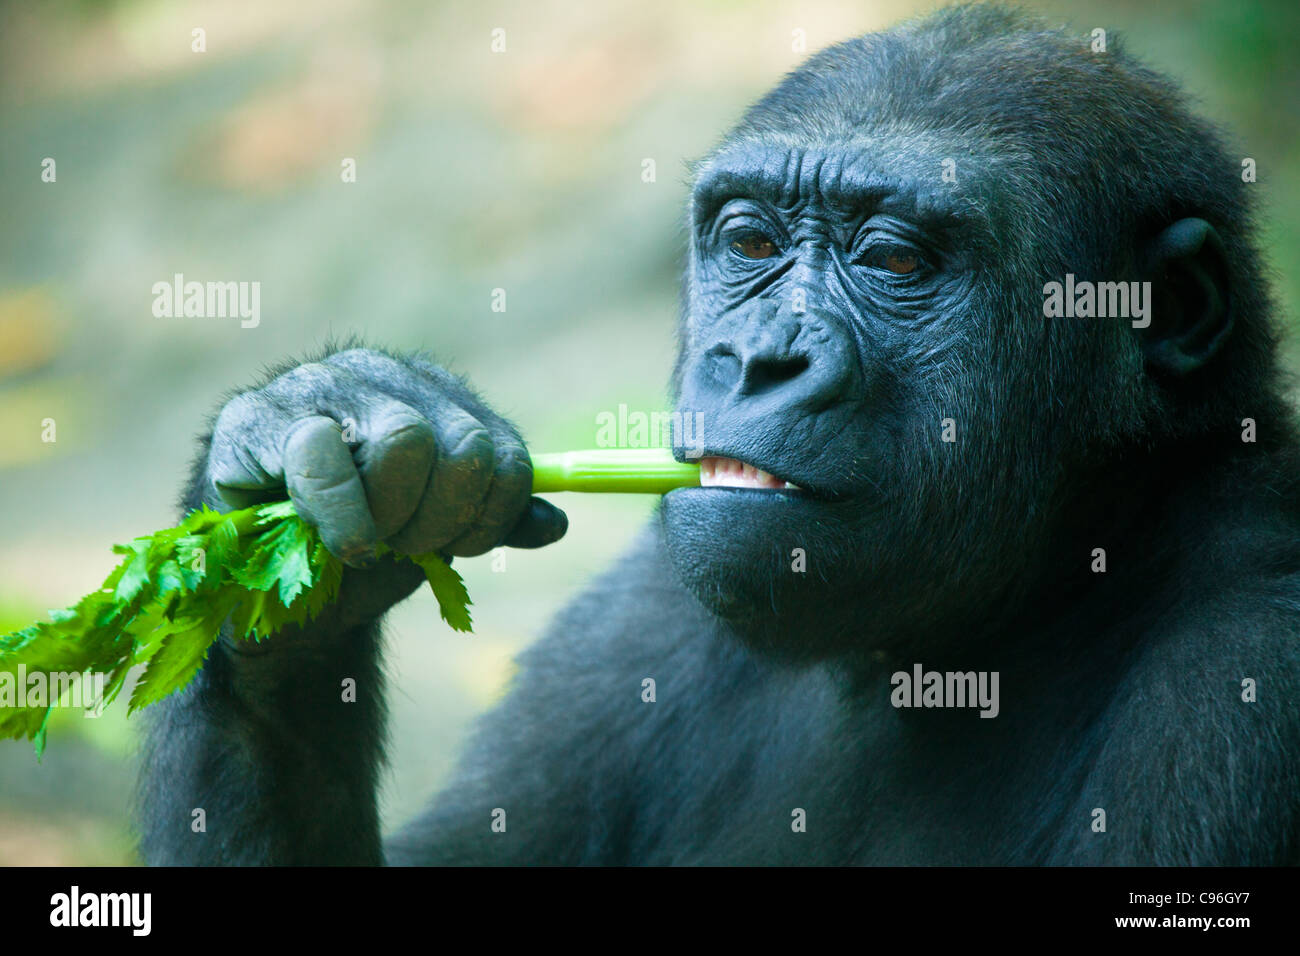 African Gorilla Eating a Celery Stick Stock Photo